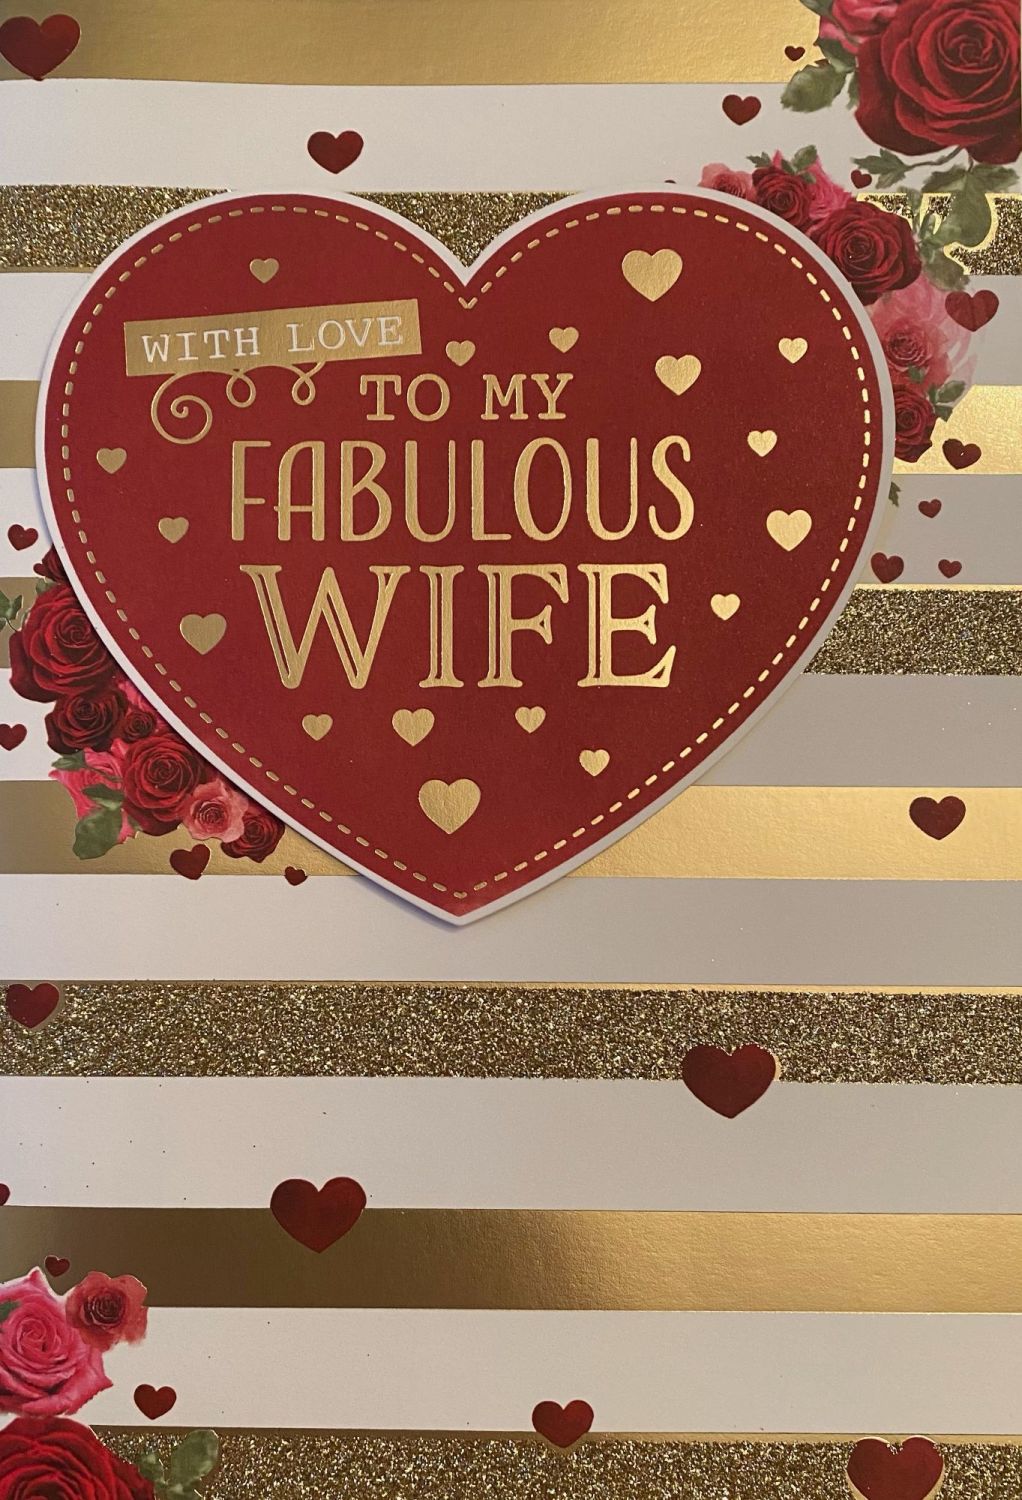 With Love To My Fabulous Wife - Valentine's Card